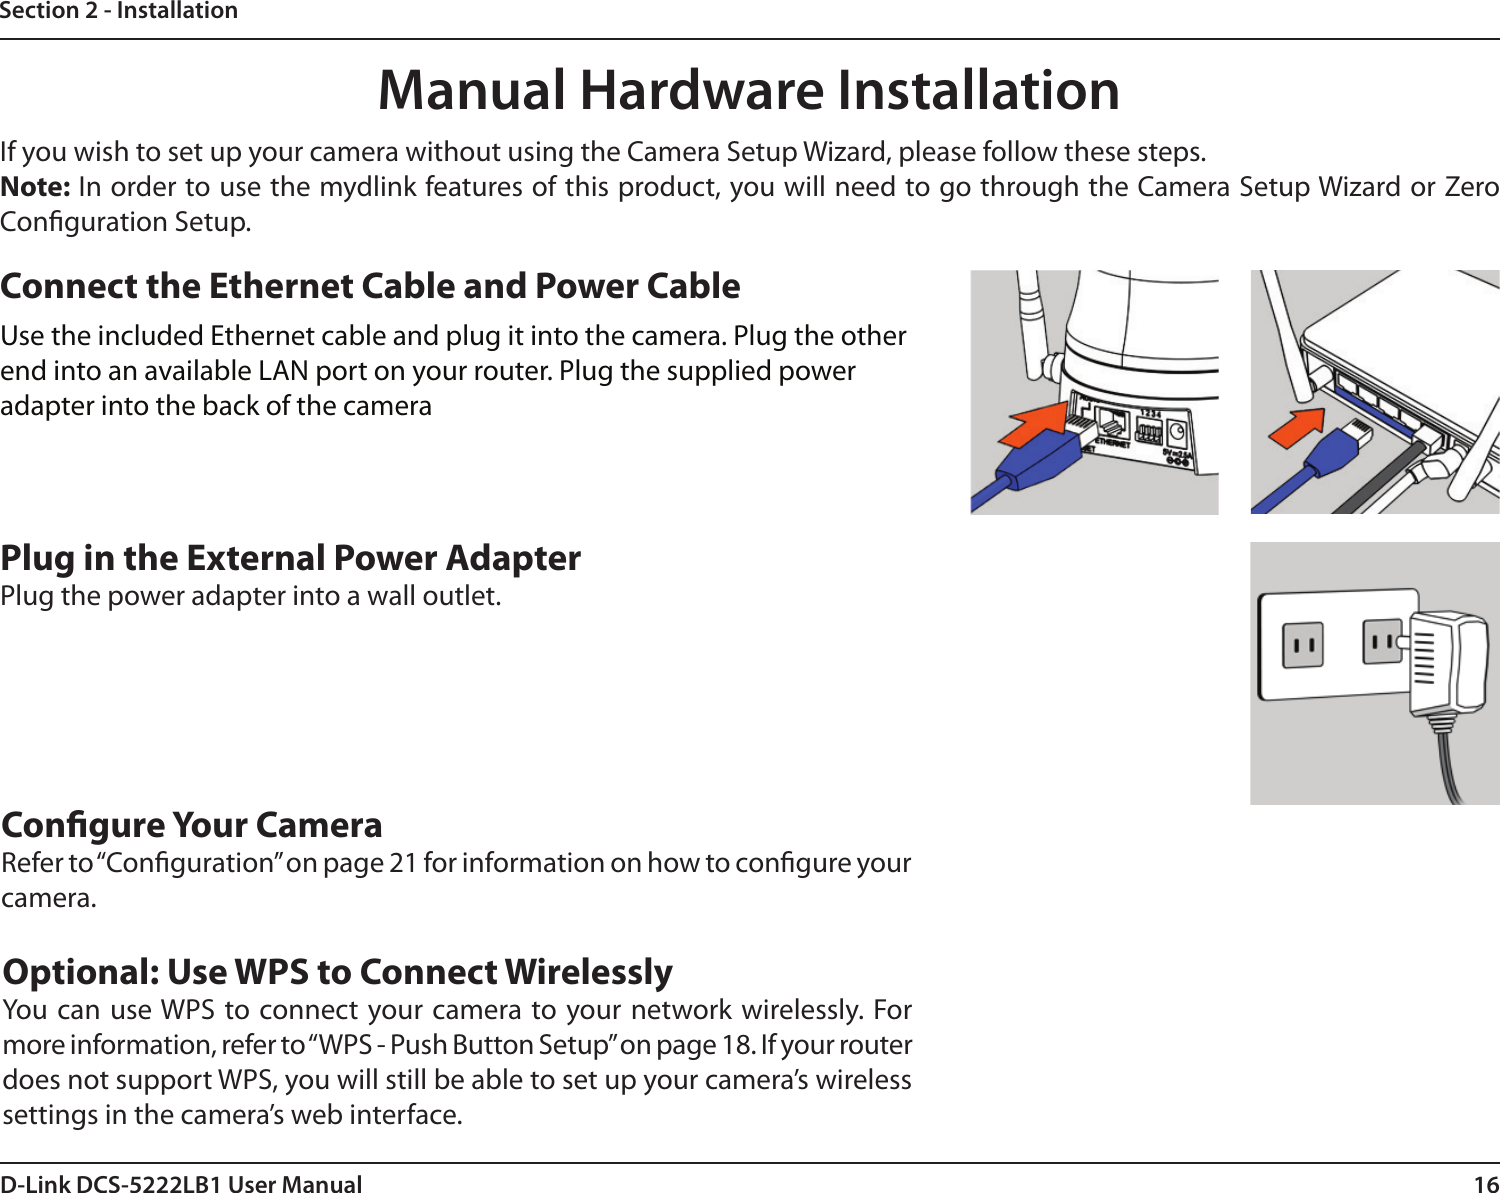 16D-Link DCS-5222LB1 User ManualSection 2 - InstallationManual Hardware InstallationIf you wish to set up your camera without using the Camera Setup Wizard, please follow these steps. Note: In order to use the mydlink features of this product, you will need to go through the Camera Setup Wizard or Zero Conguration Setup.Optional: Use WPS to Connect WirelesslyYou can use WPS to  connect your camera to your network wirelessly. For more information, refer to “WPS - Push Button Setup” on page 18. If your router does not support WPS, you will still be able to set up your camera’s wireless settings in the camera’s web interface.Connect the Ethernet Cable and Power CableUse the included Ethernet cable and plug it into the camera. Plug the other end into an available LAN port on your router. Plug the supplied power adapter into the back of the cameraPlug in the External Power AdapterPlug the power adapter into a wall outlet.Congure Your CameraRefer to “Conguration” on page 21 for information on how to congure your camera.